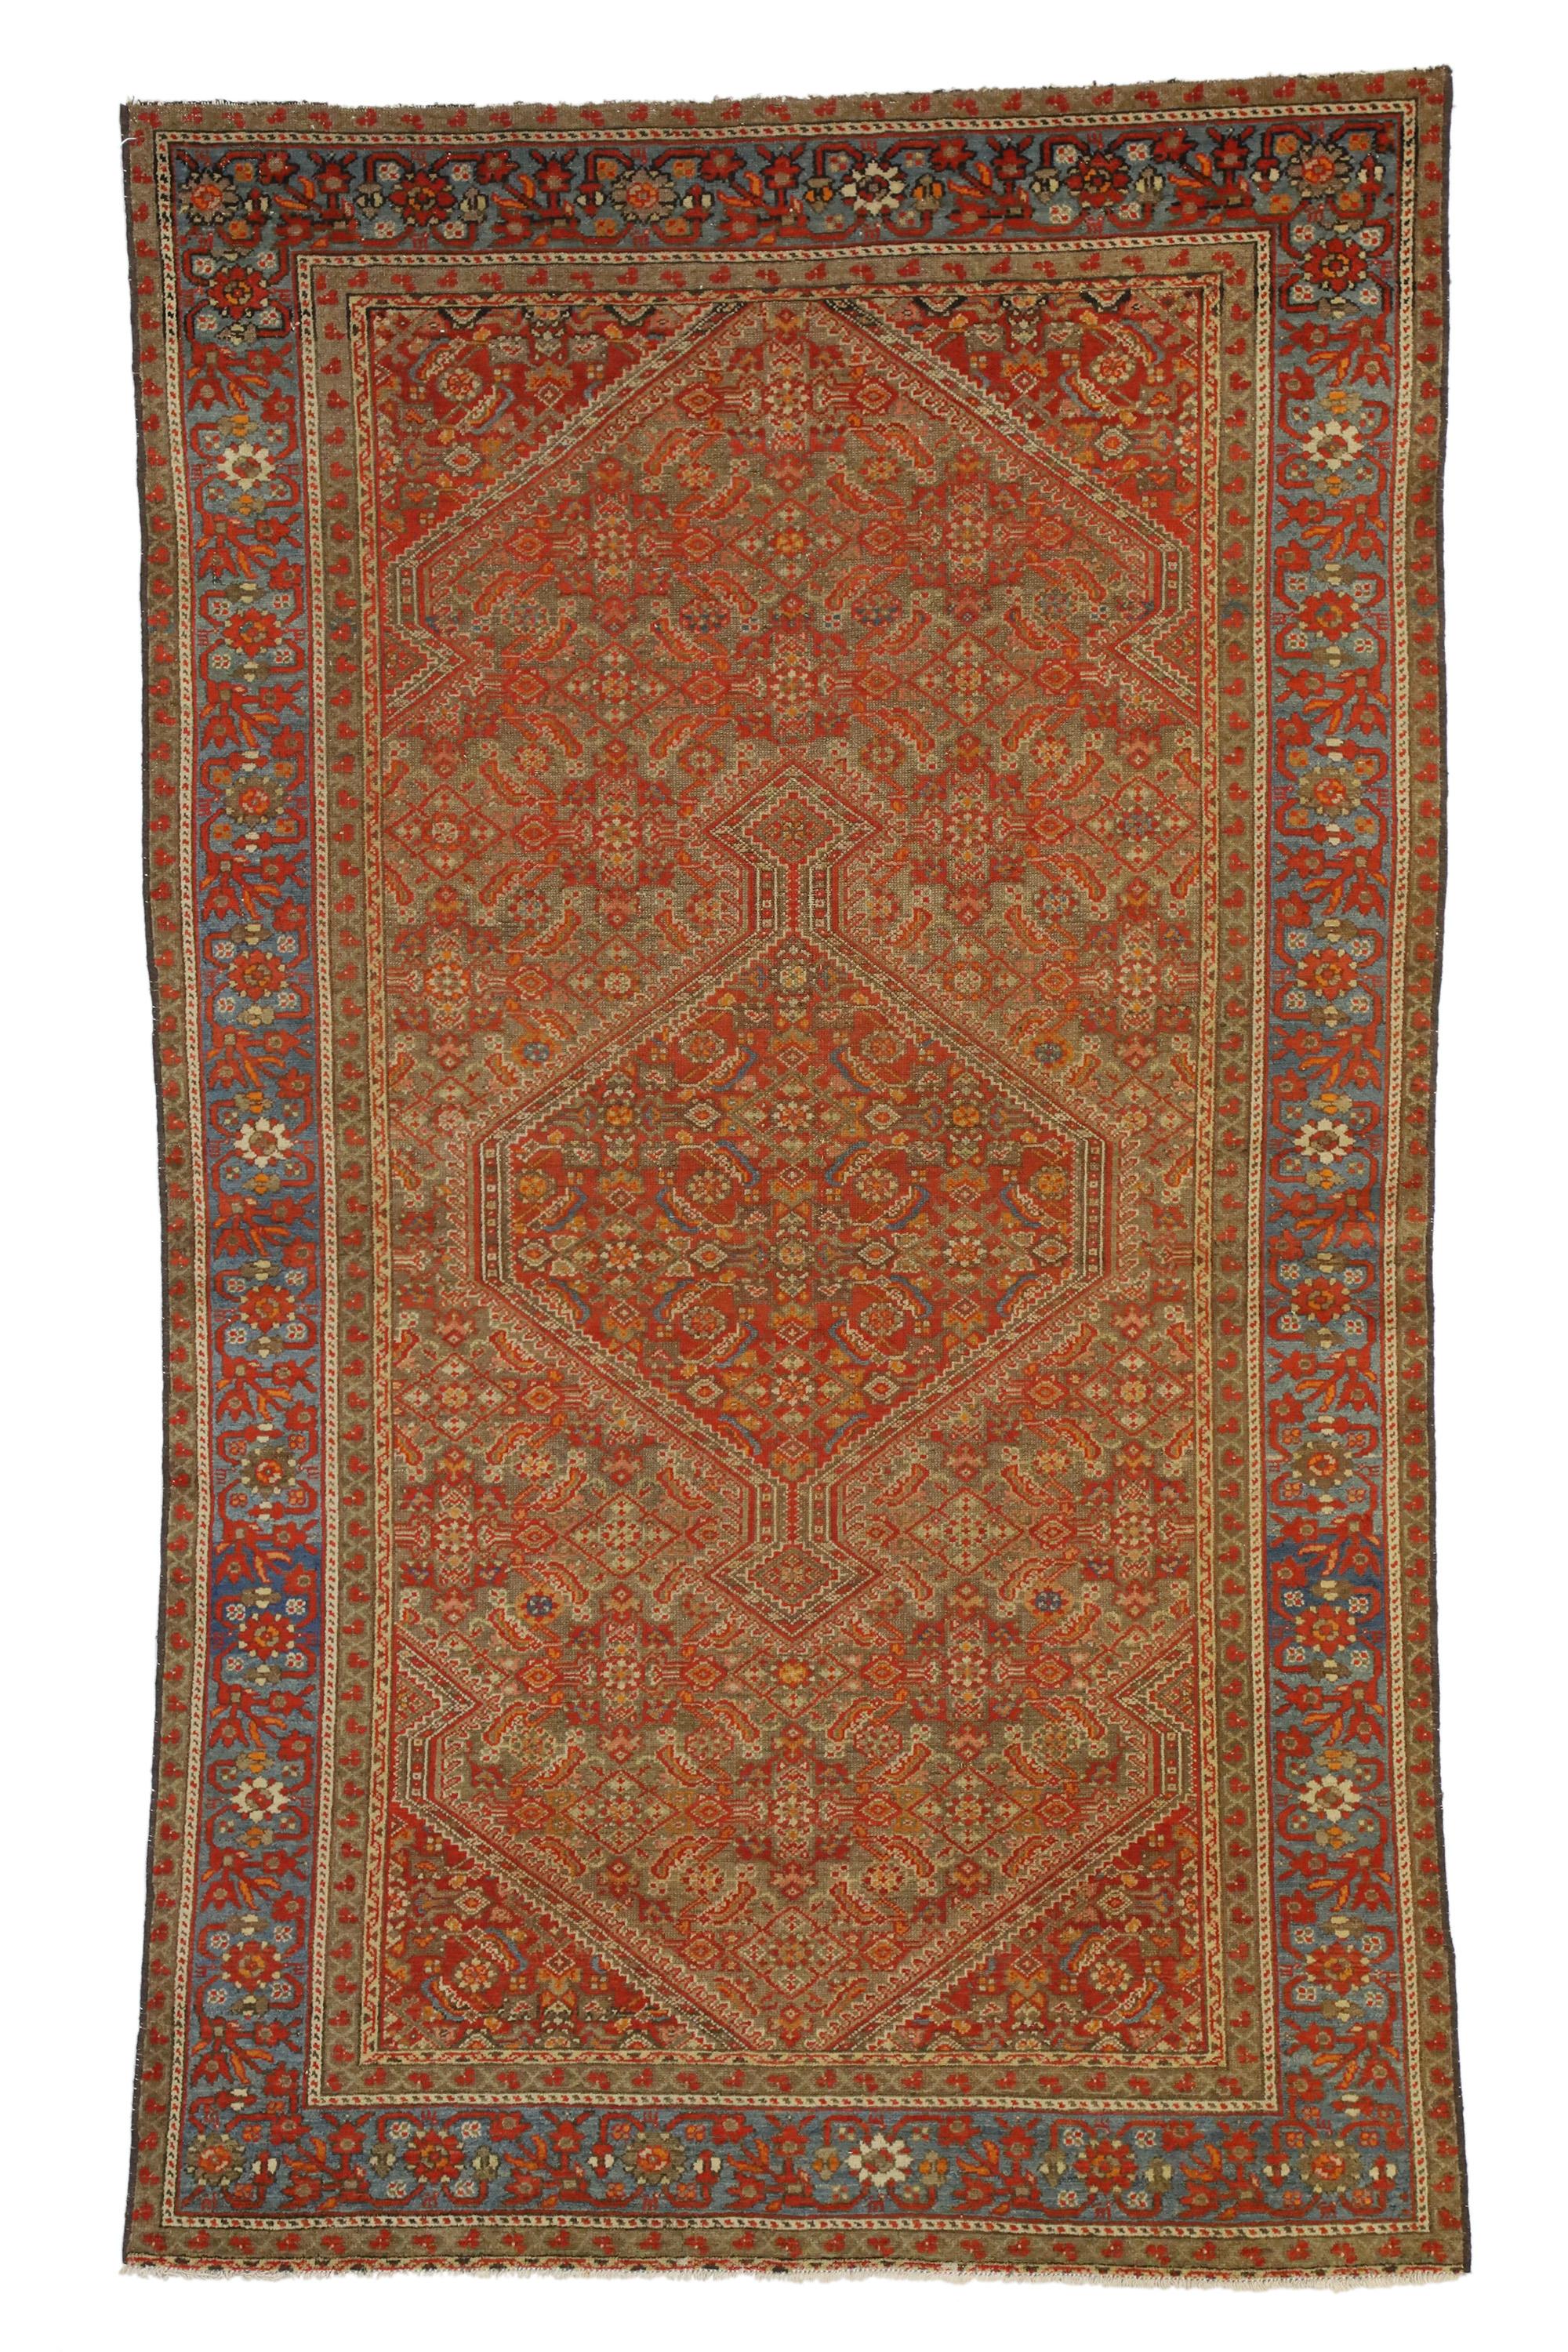 Antique Persian Mishan Malayer Rug with Northwestern Arts & Crafts Style For Sale 3